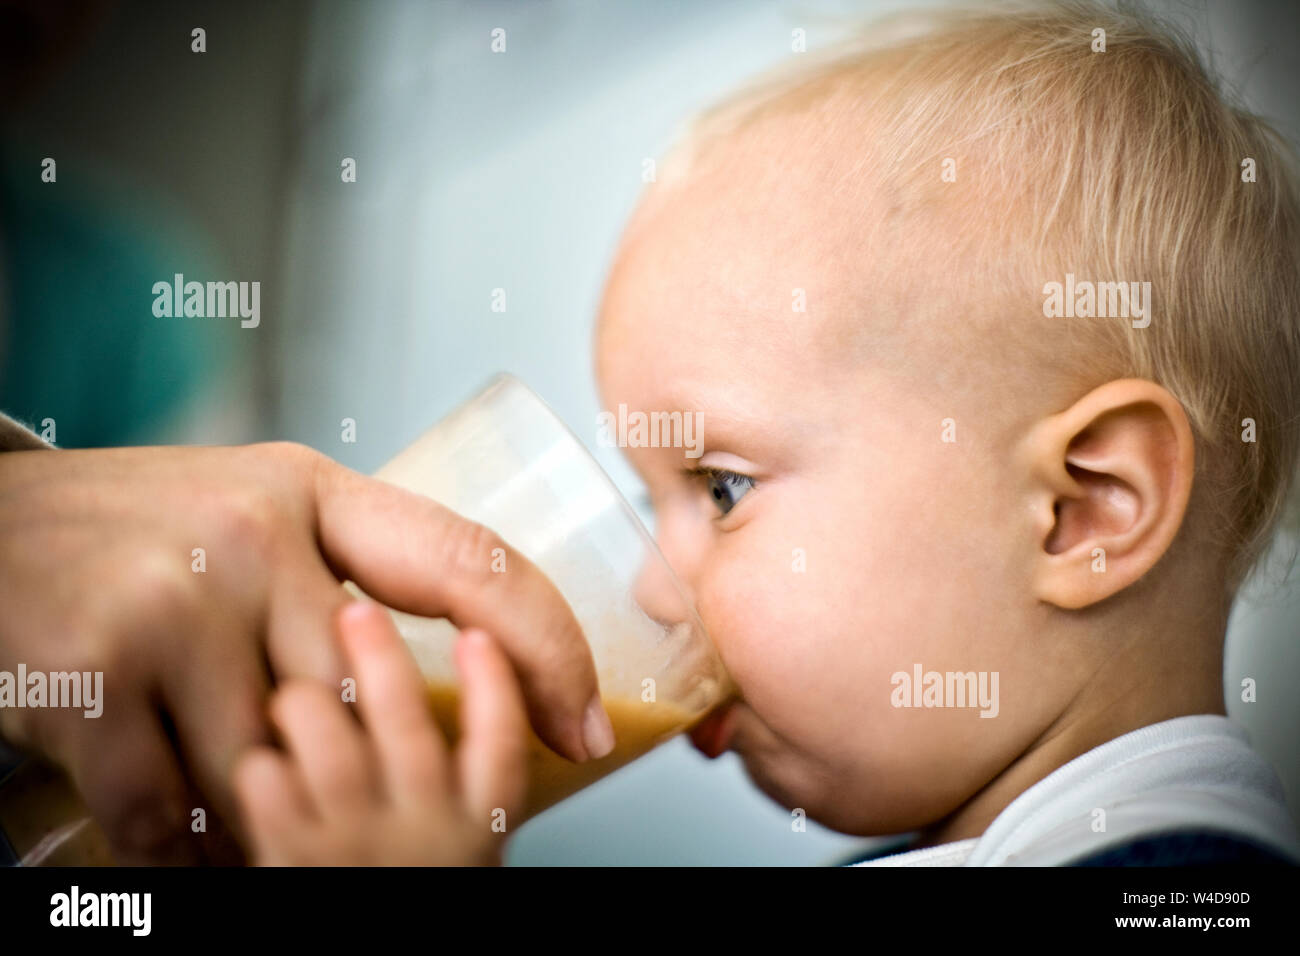 Toddler being helped to drink juice out of a glass. Stock Photo